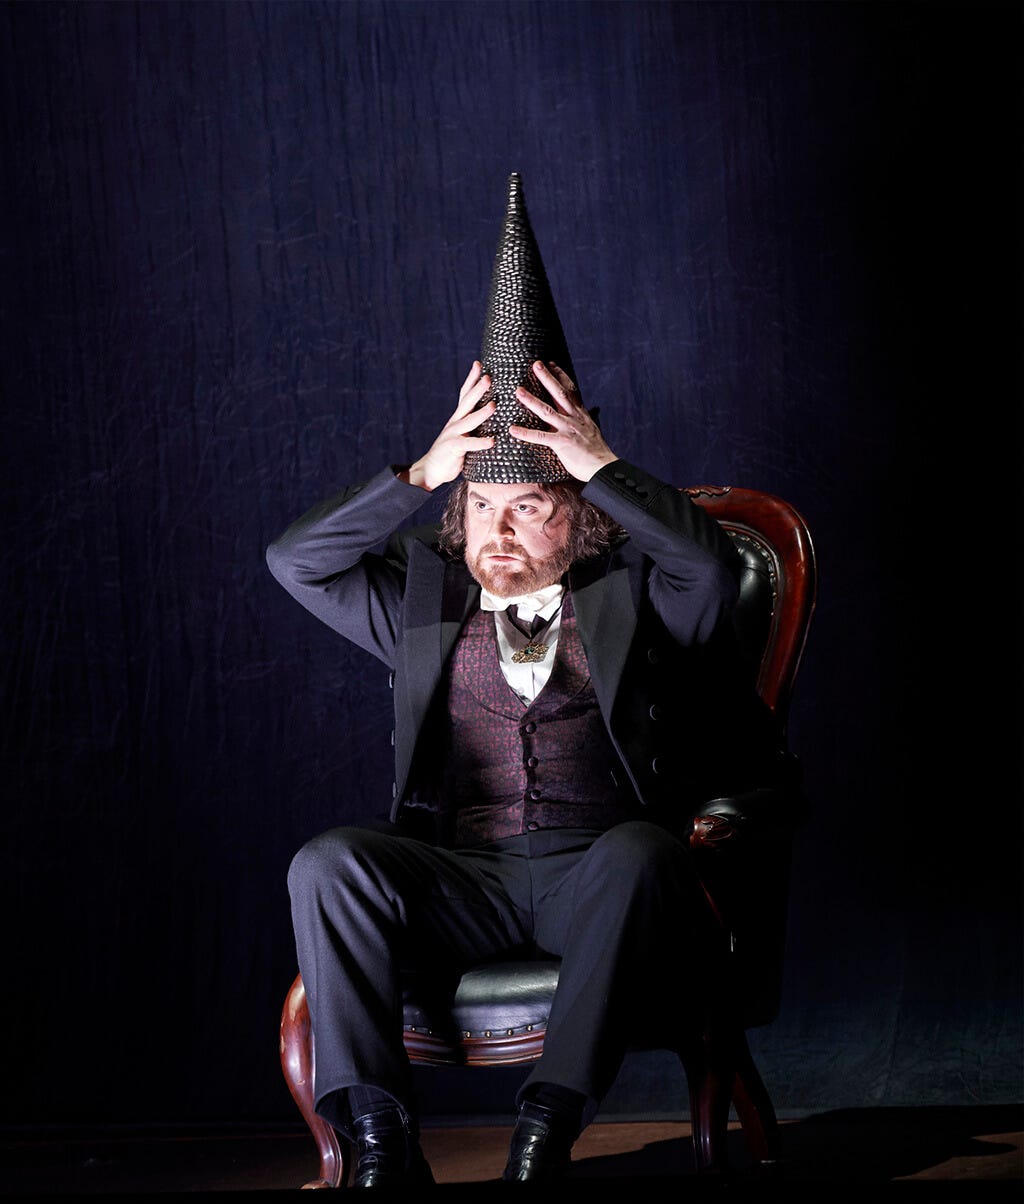 An image from a production of Rigoletto. A man in a Victorian three-piece suit, seated in a chair, places a dunce cap on his head.